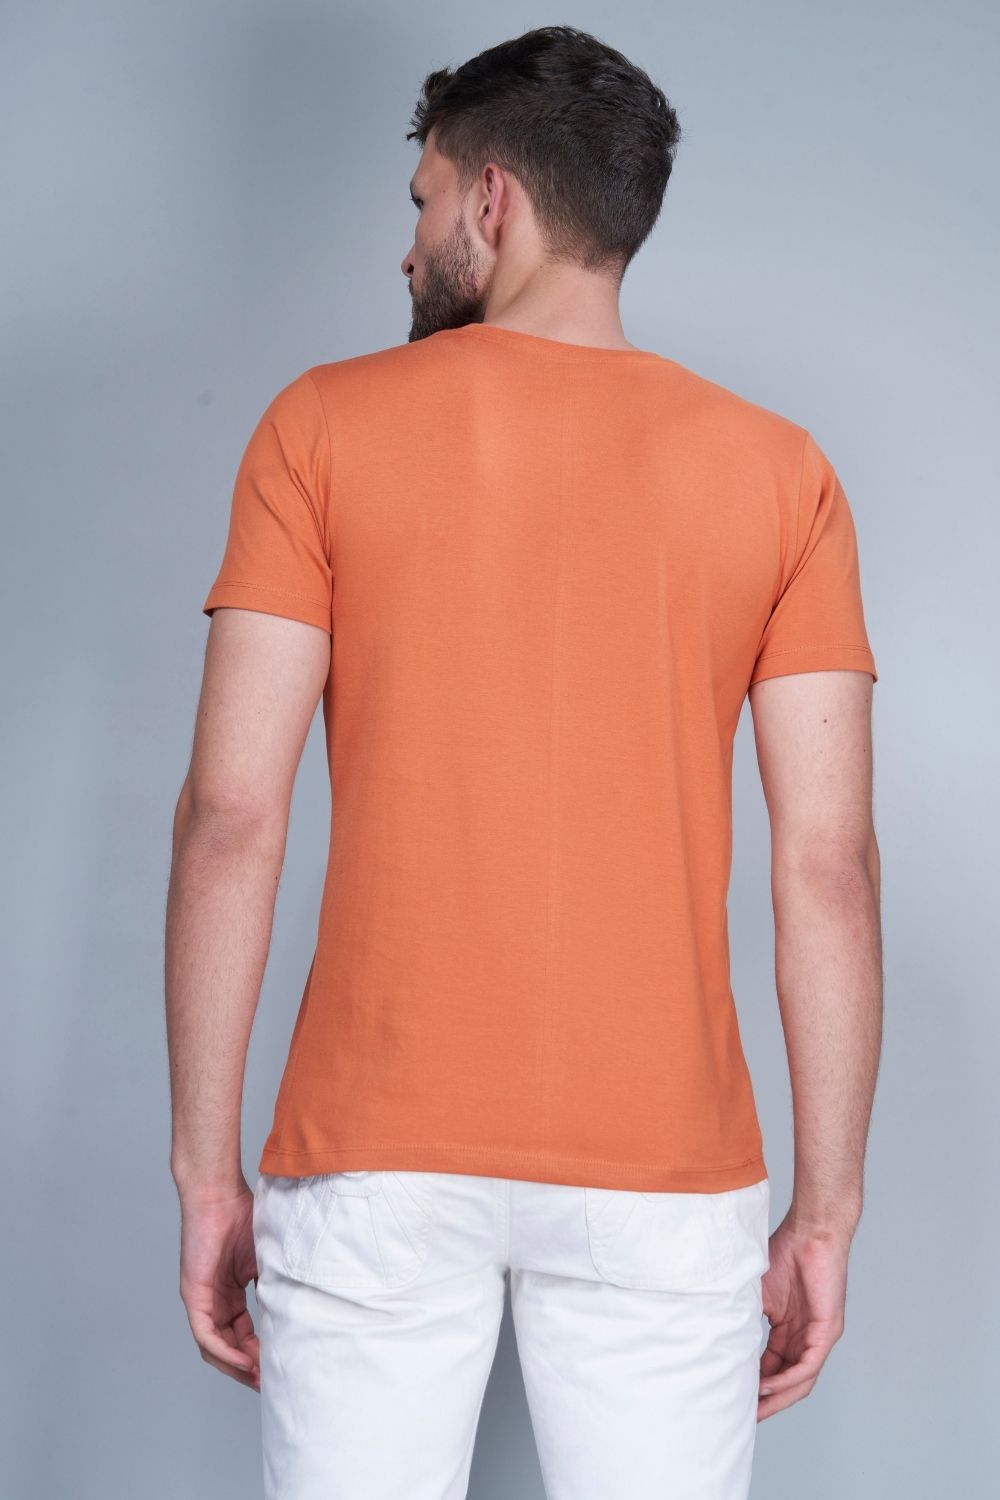 Solid T shirt for men in the color Sand stone  with half sleeves and round neck, back view.